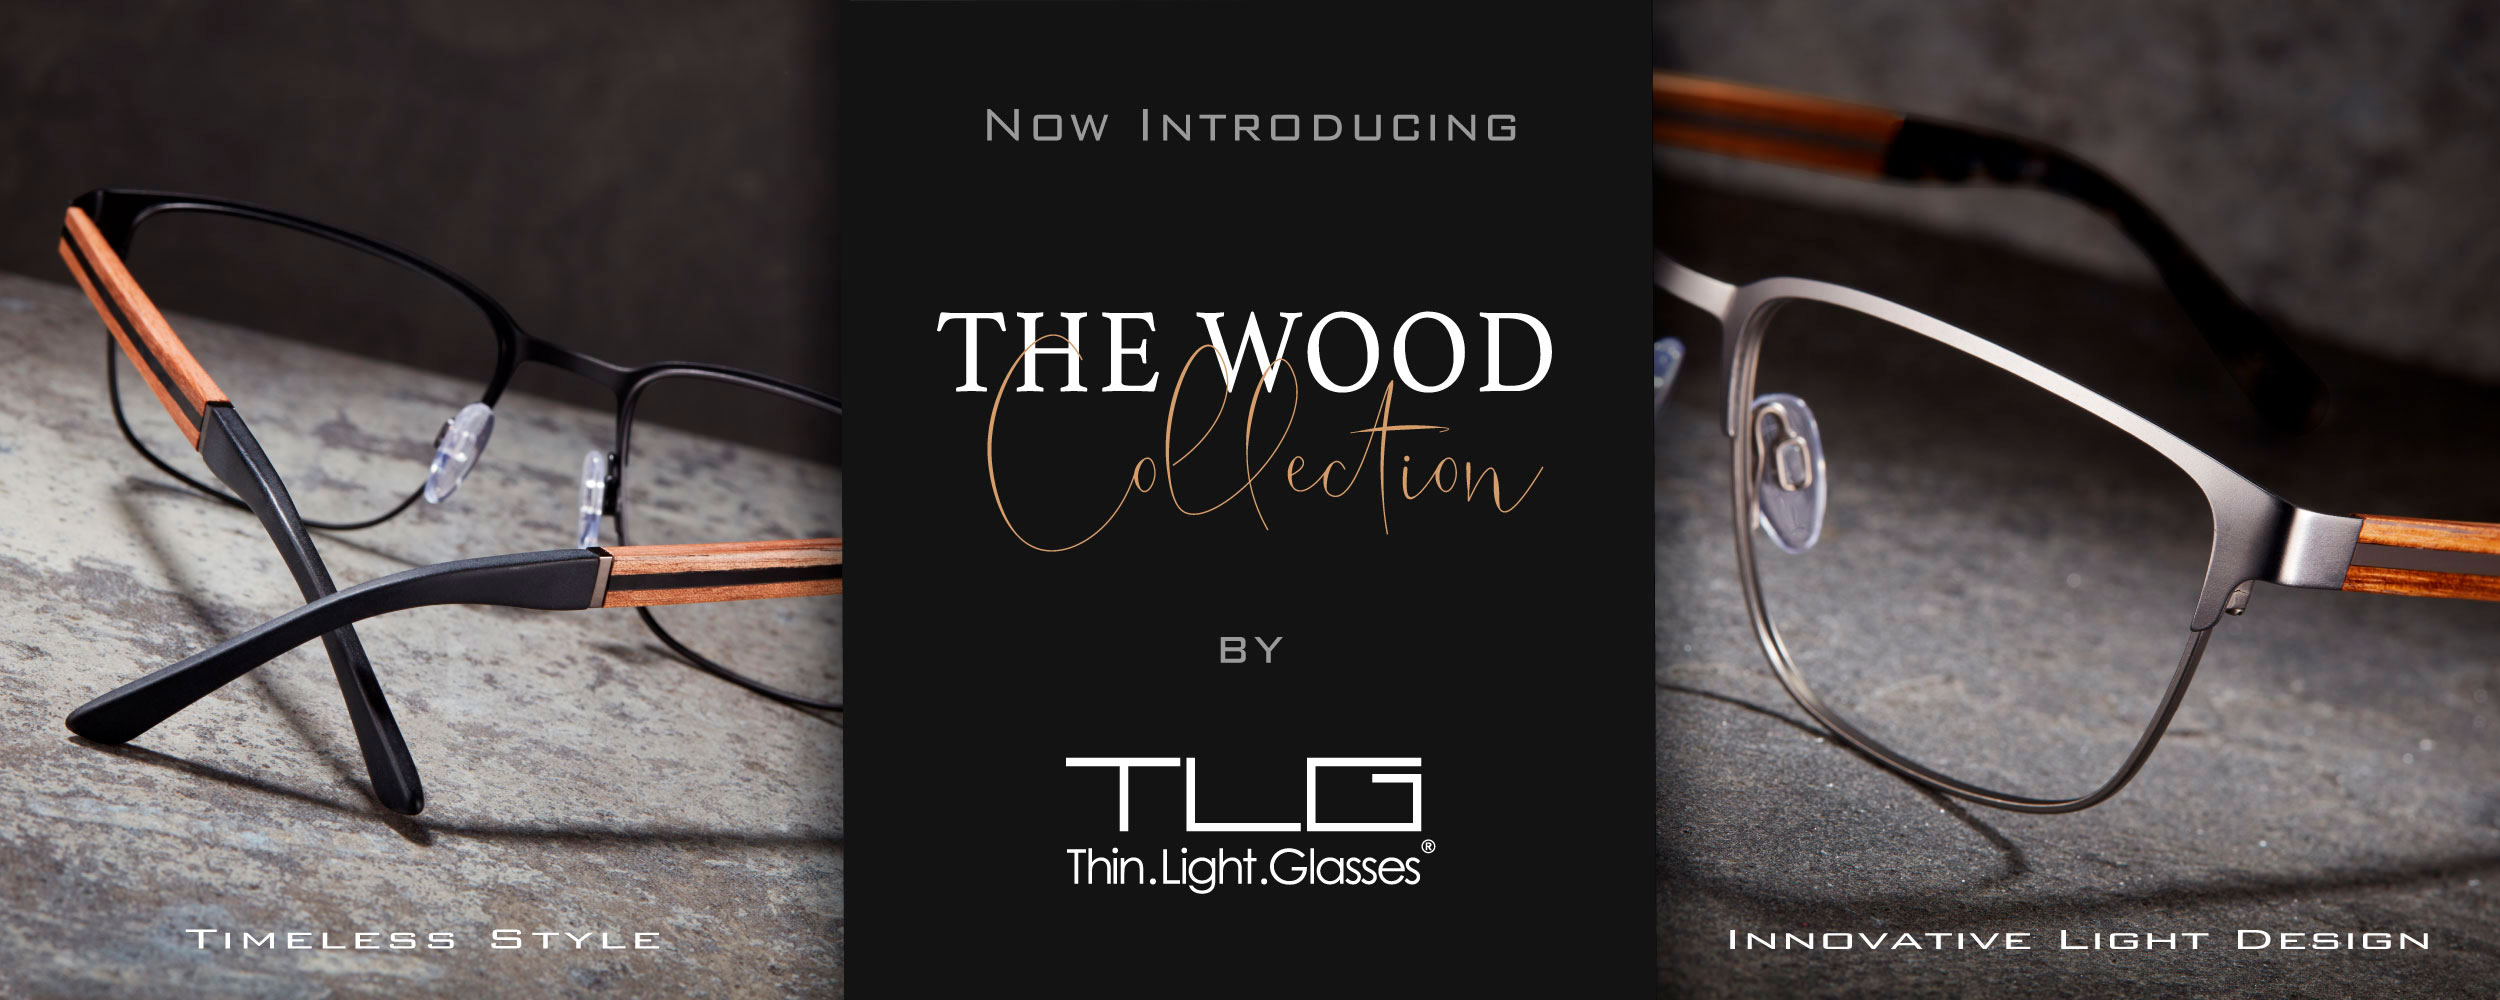 Now introducing THE WOOD COLLECTION by TLG. Thin. Light.Glasses®.